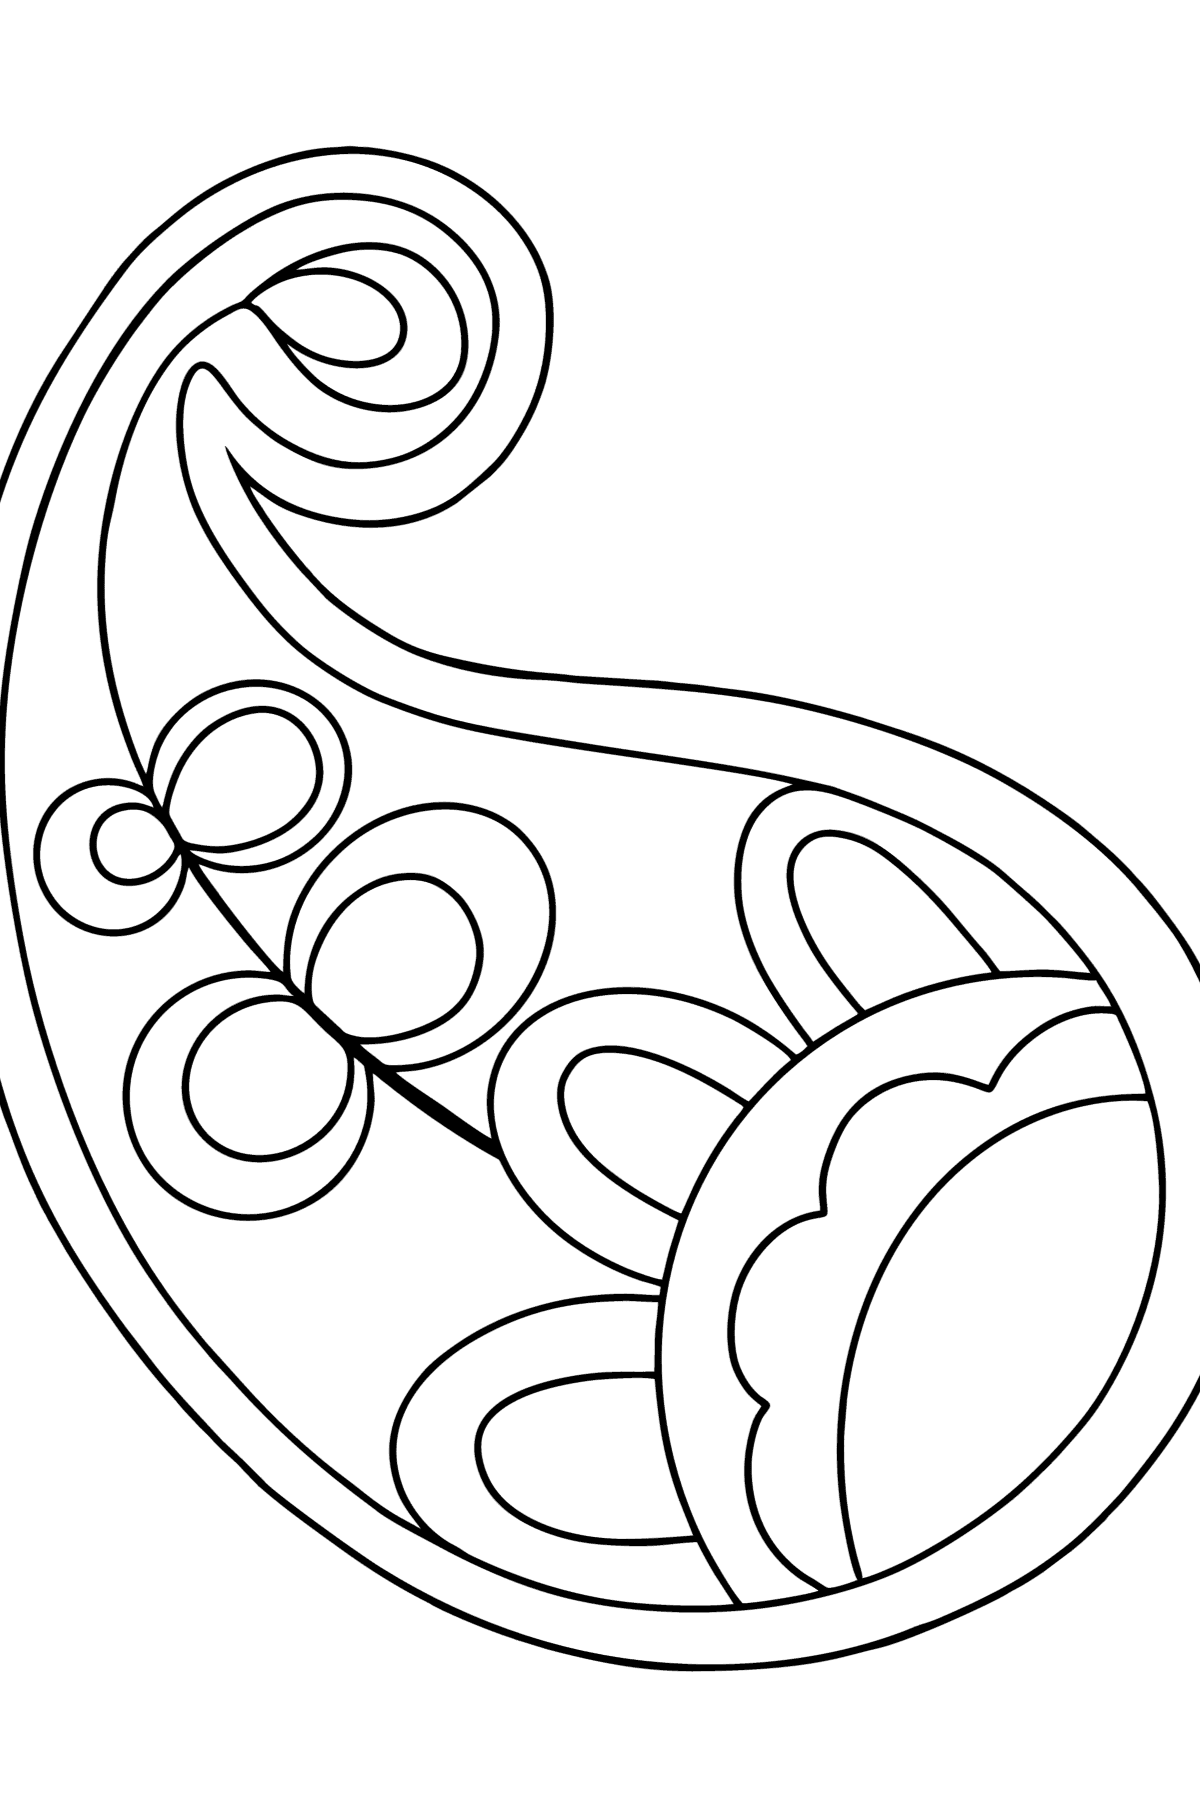 Paisley coloring page for Kids - Coloring Pages for Kids